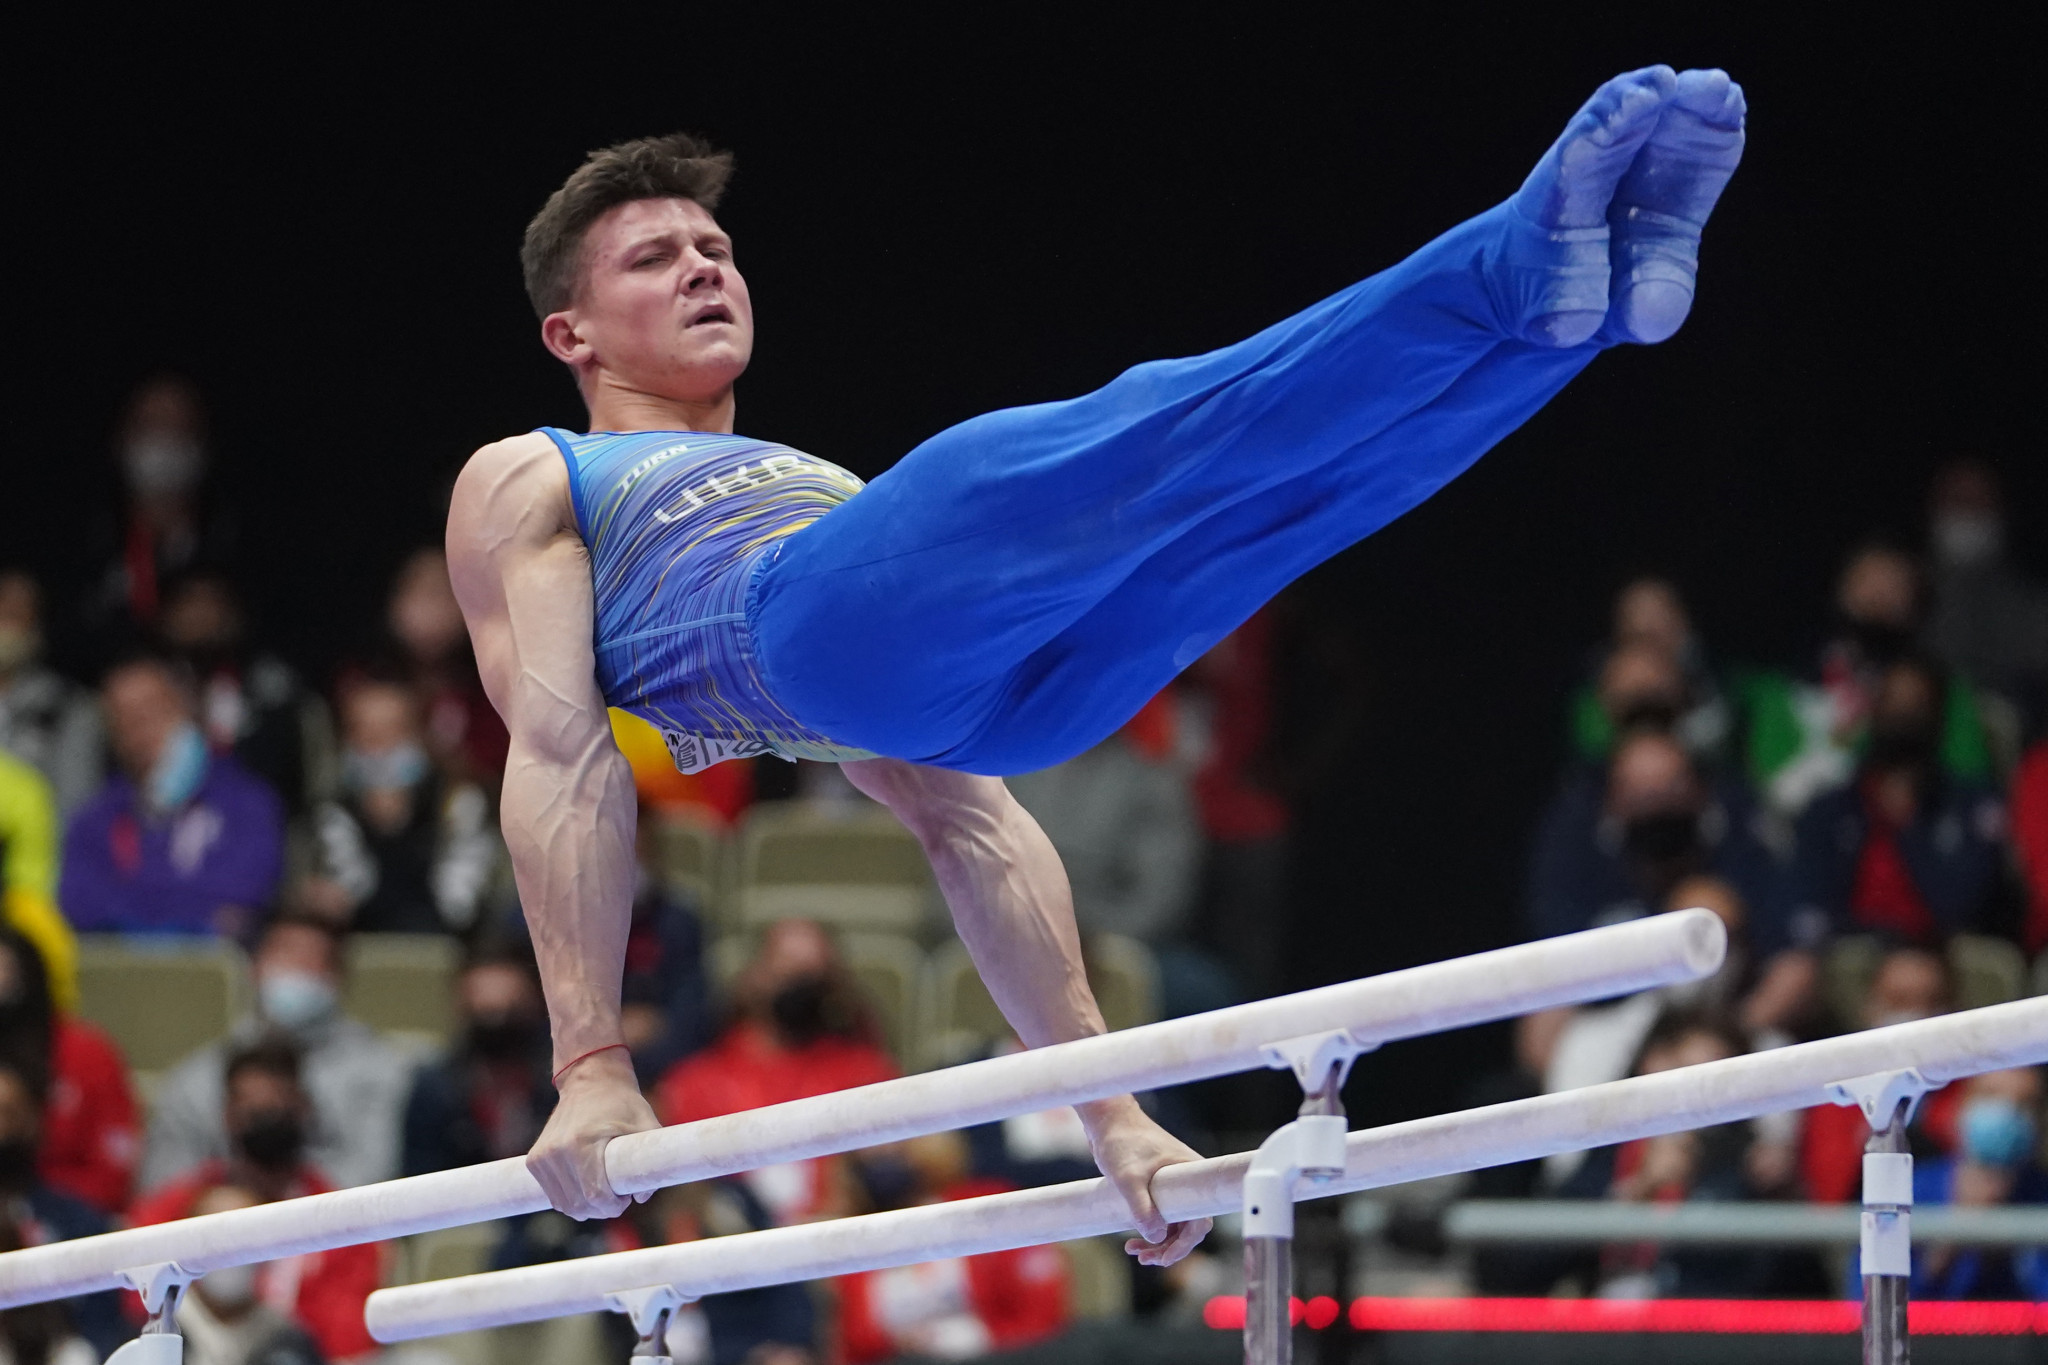 Ukraine's Illia Kovtun won gold in the men's parallel bars at the FIG Apparatus World Cup in Cottbus ©Getty Images